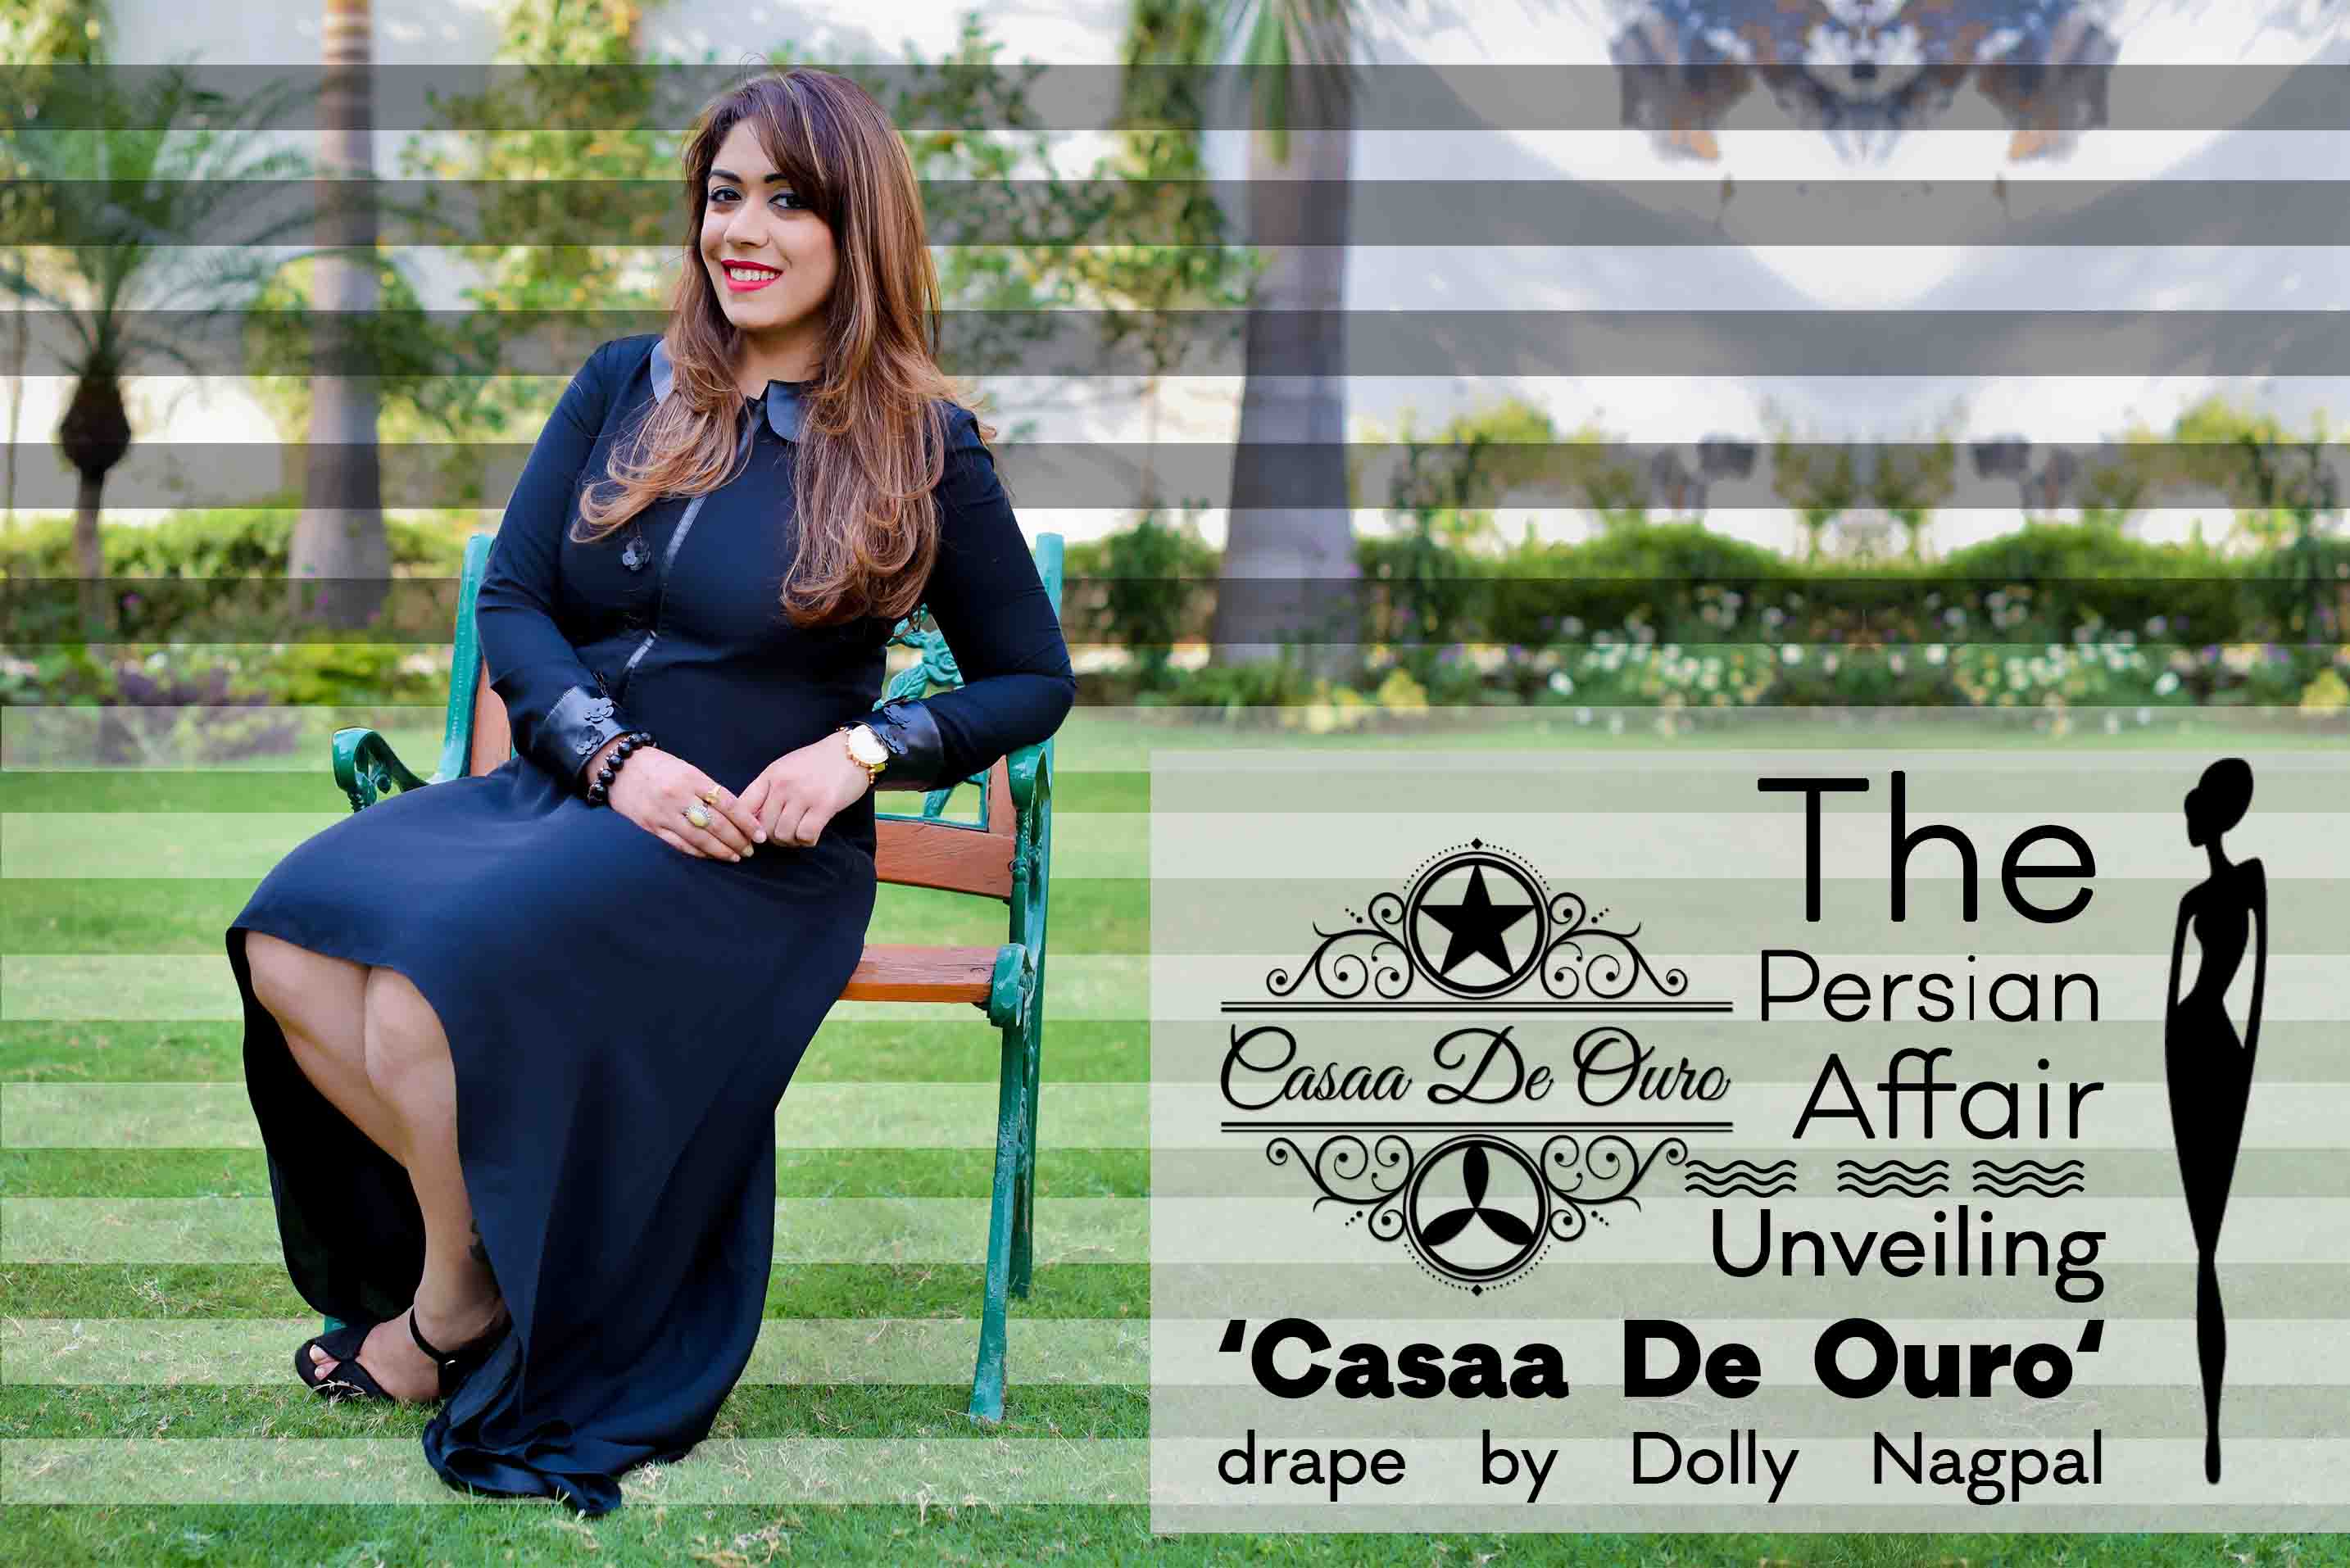 The Persian affair : Unveiling ‘Casaa De Ouro‘ drape by Dolly Nagpal